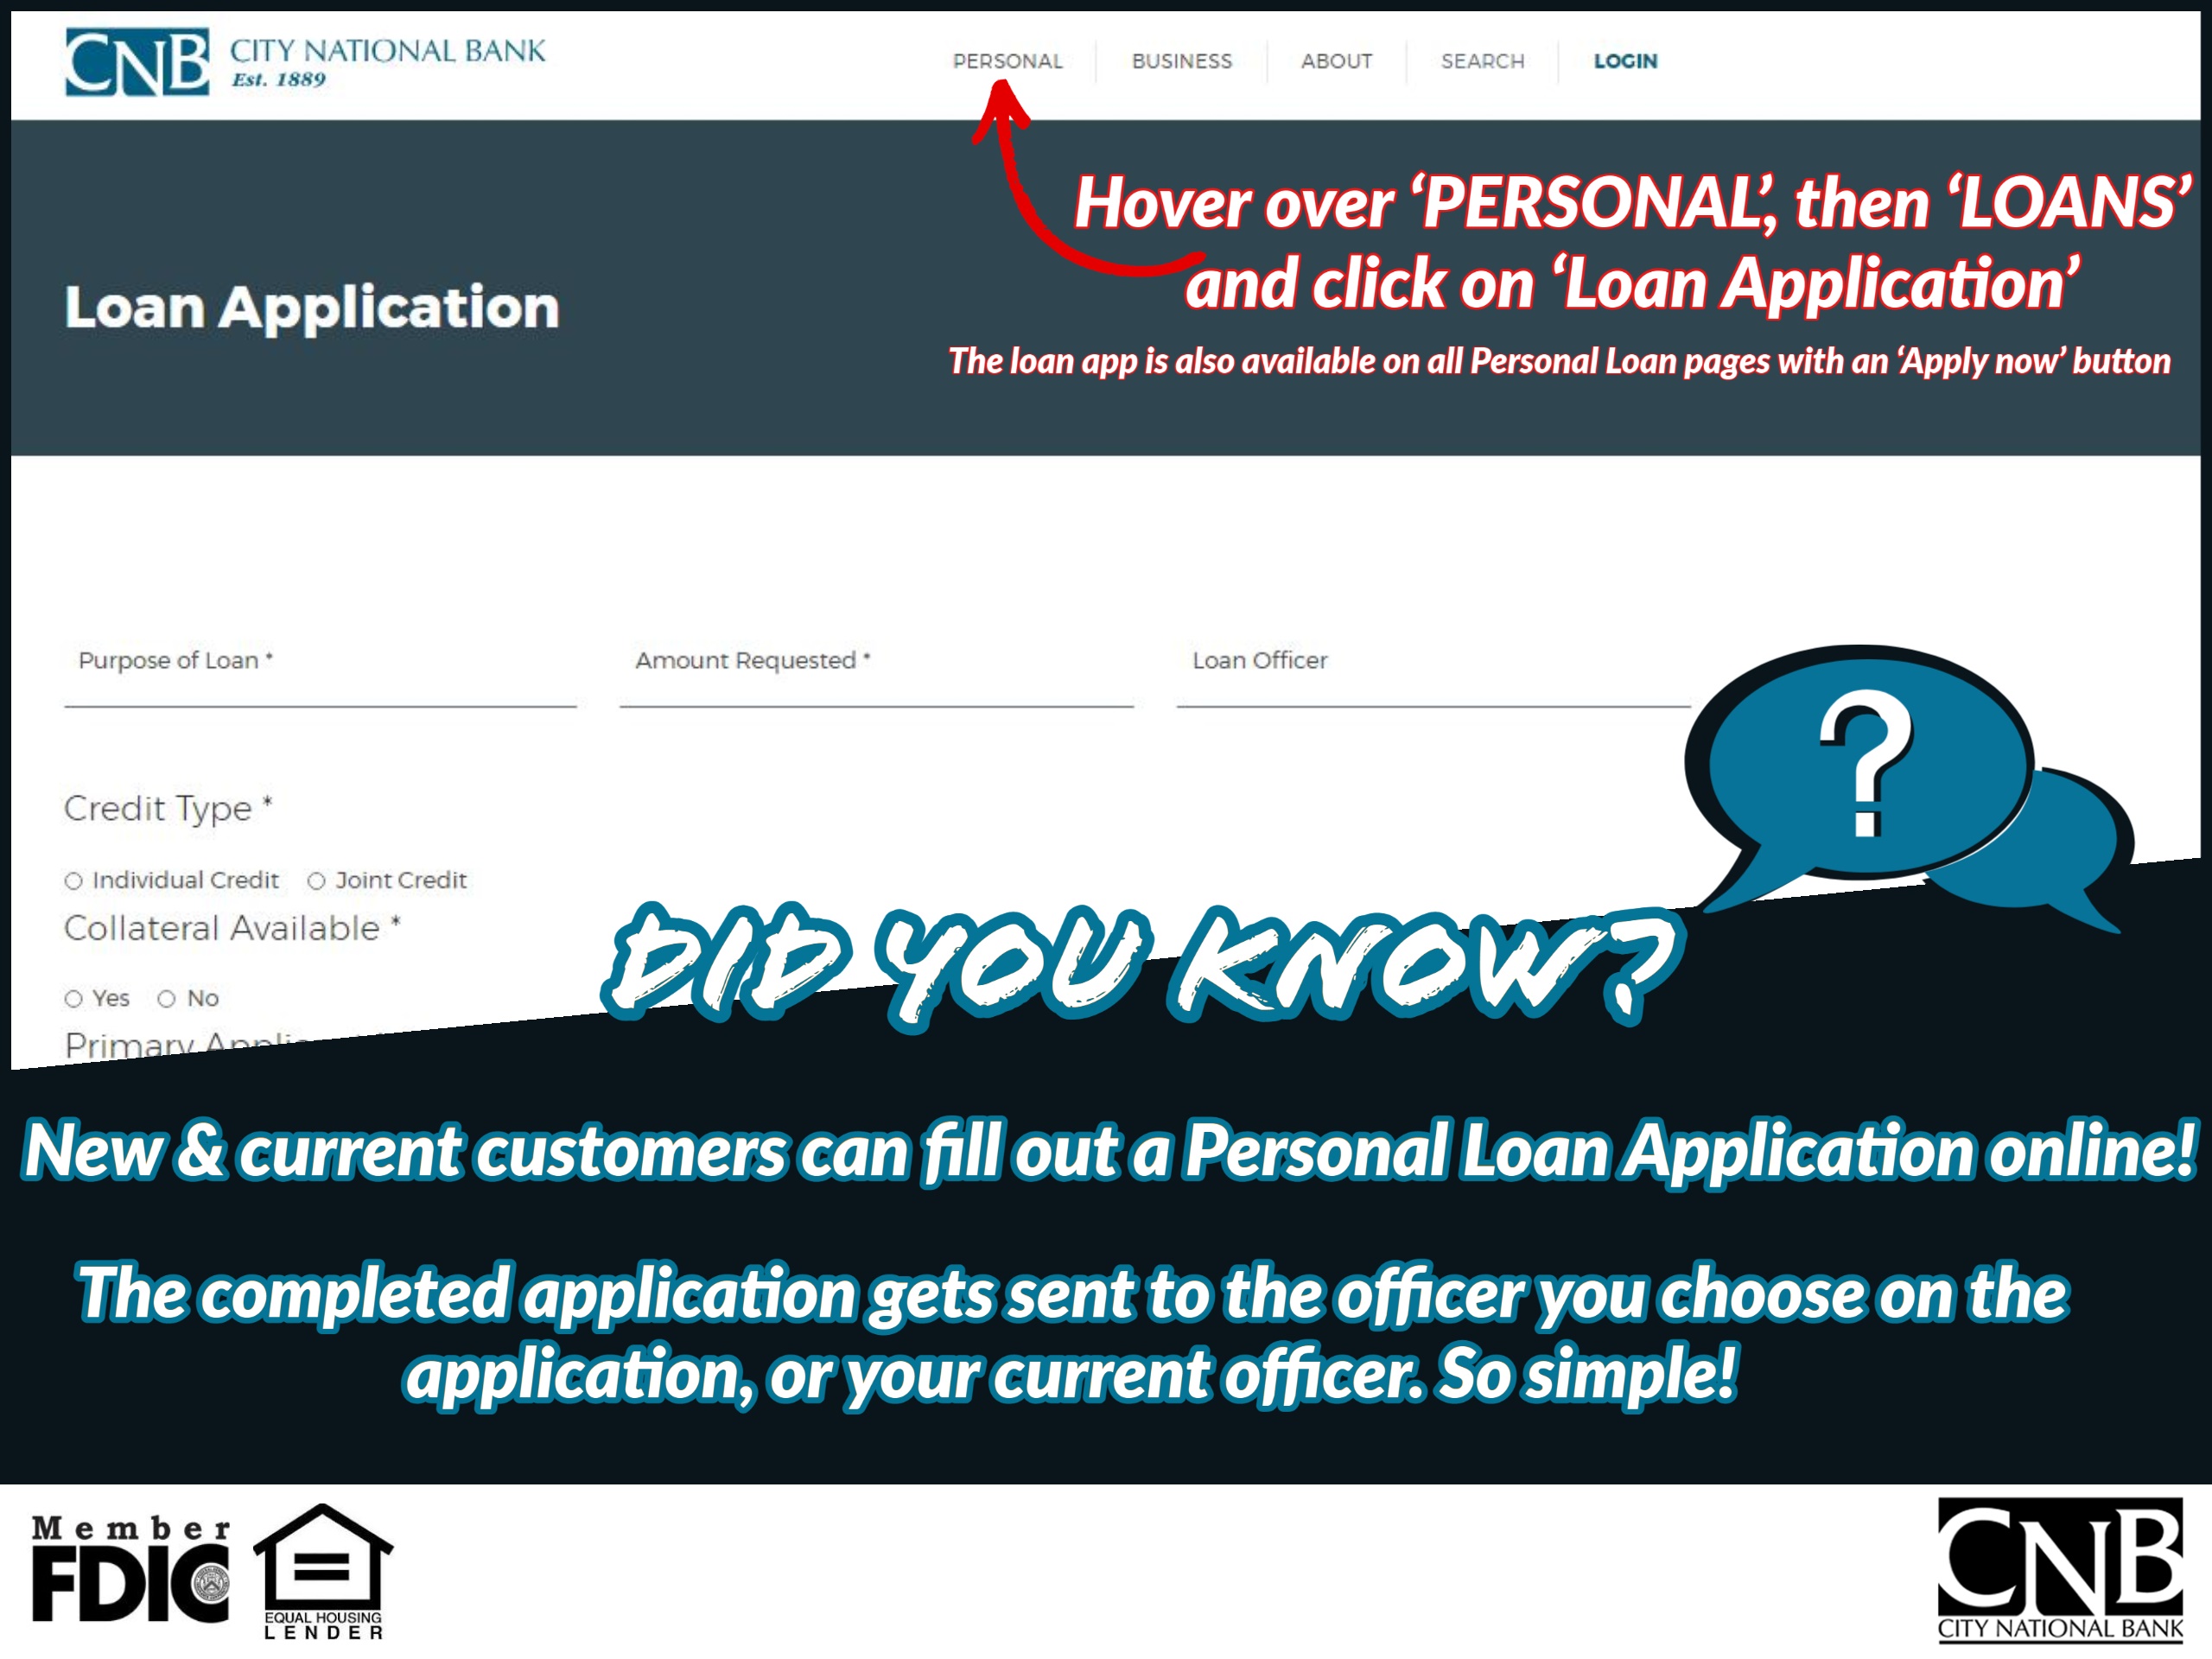 A "did you know" graphic explaining how easy it is to apply for a personal loan with CNB